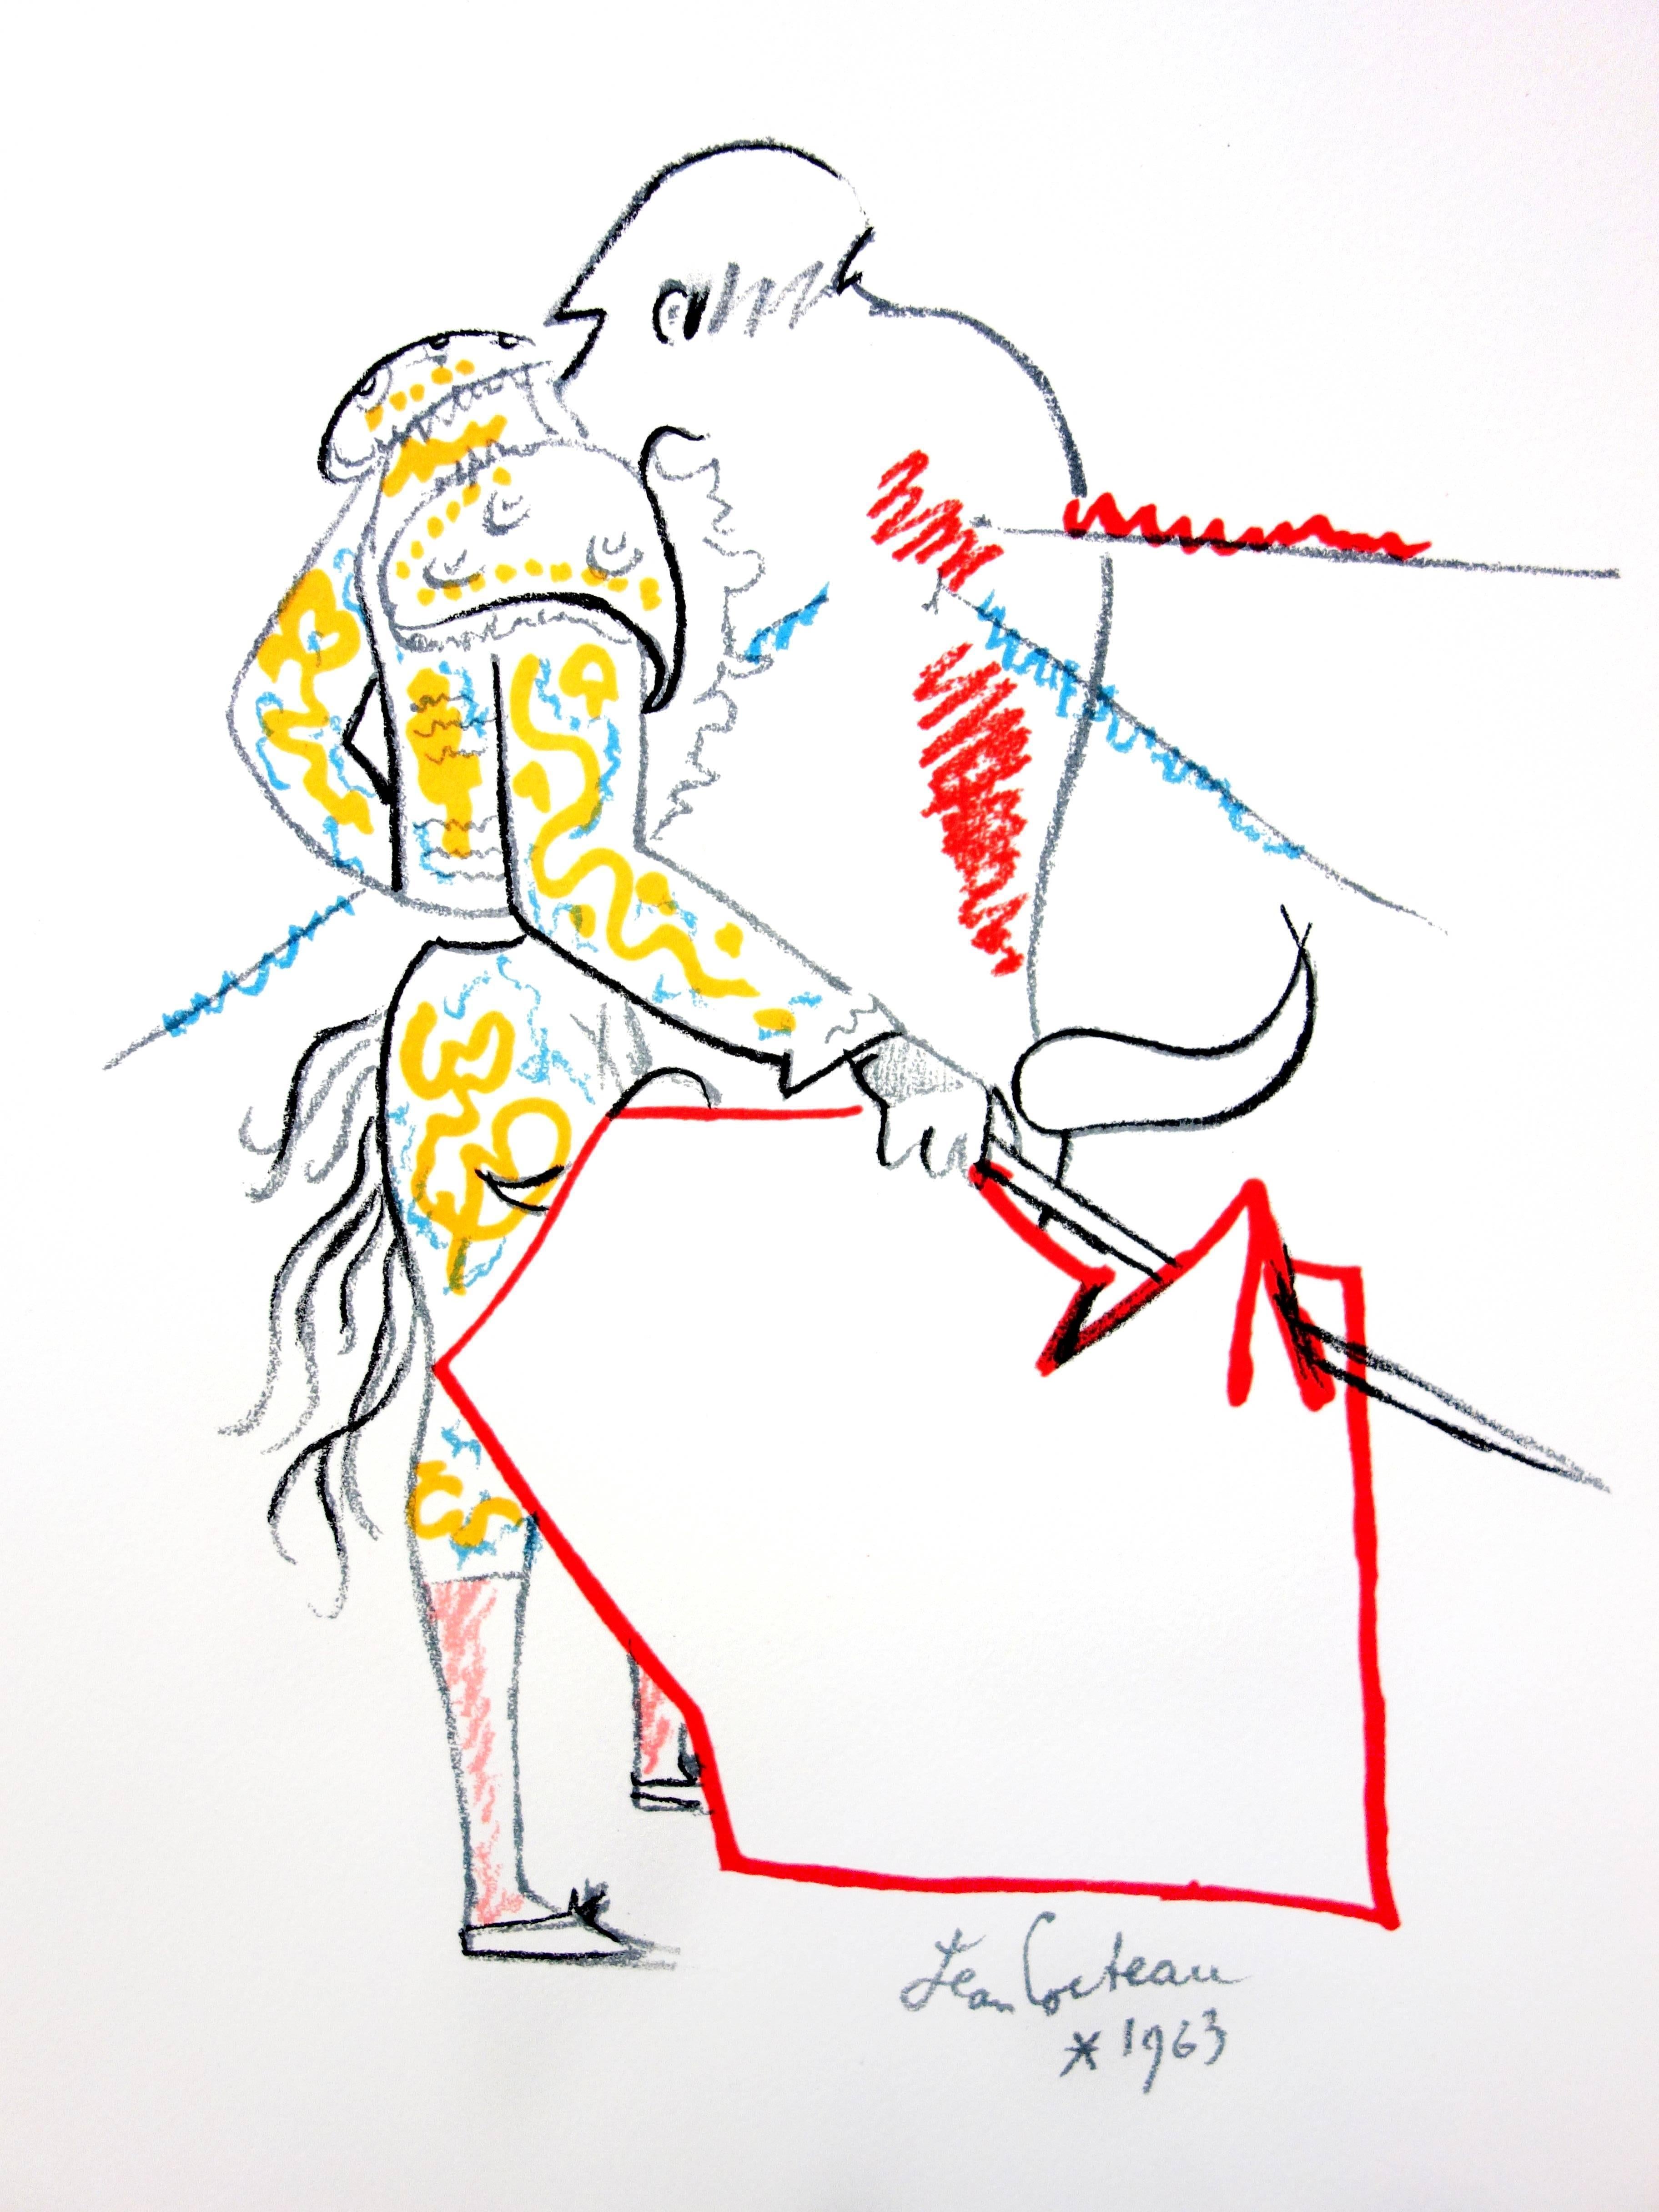 Original Lithograph by Jean Cocteau
Title: Taureaux
Signed in the plate
Dimensions: 40 x 30 cm
Edition: 200
Luxury print edition from the portfolio of Trinckvel
1965
From the last portfolio Cocteau worked on, finished shortly before he died.
